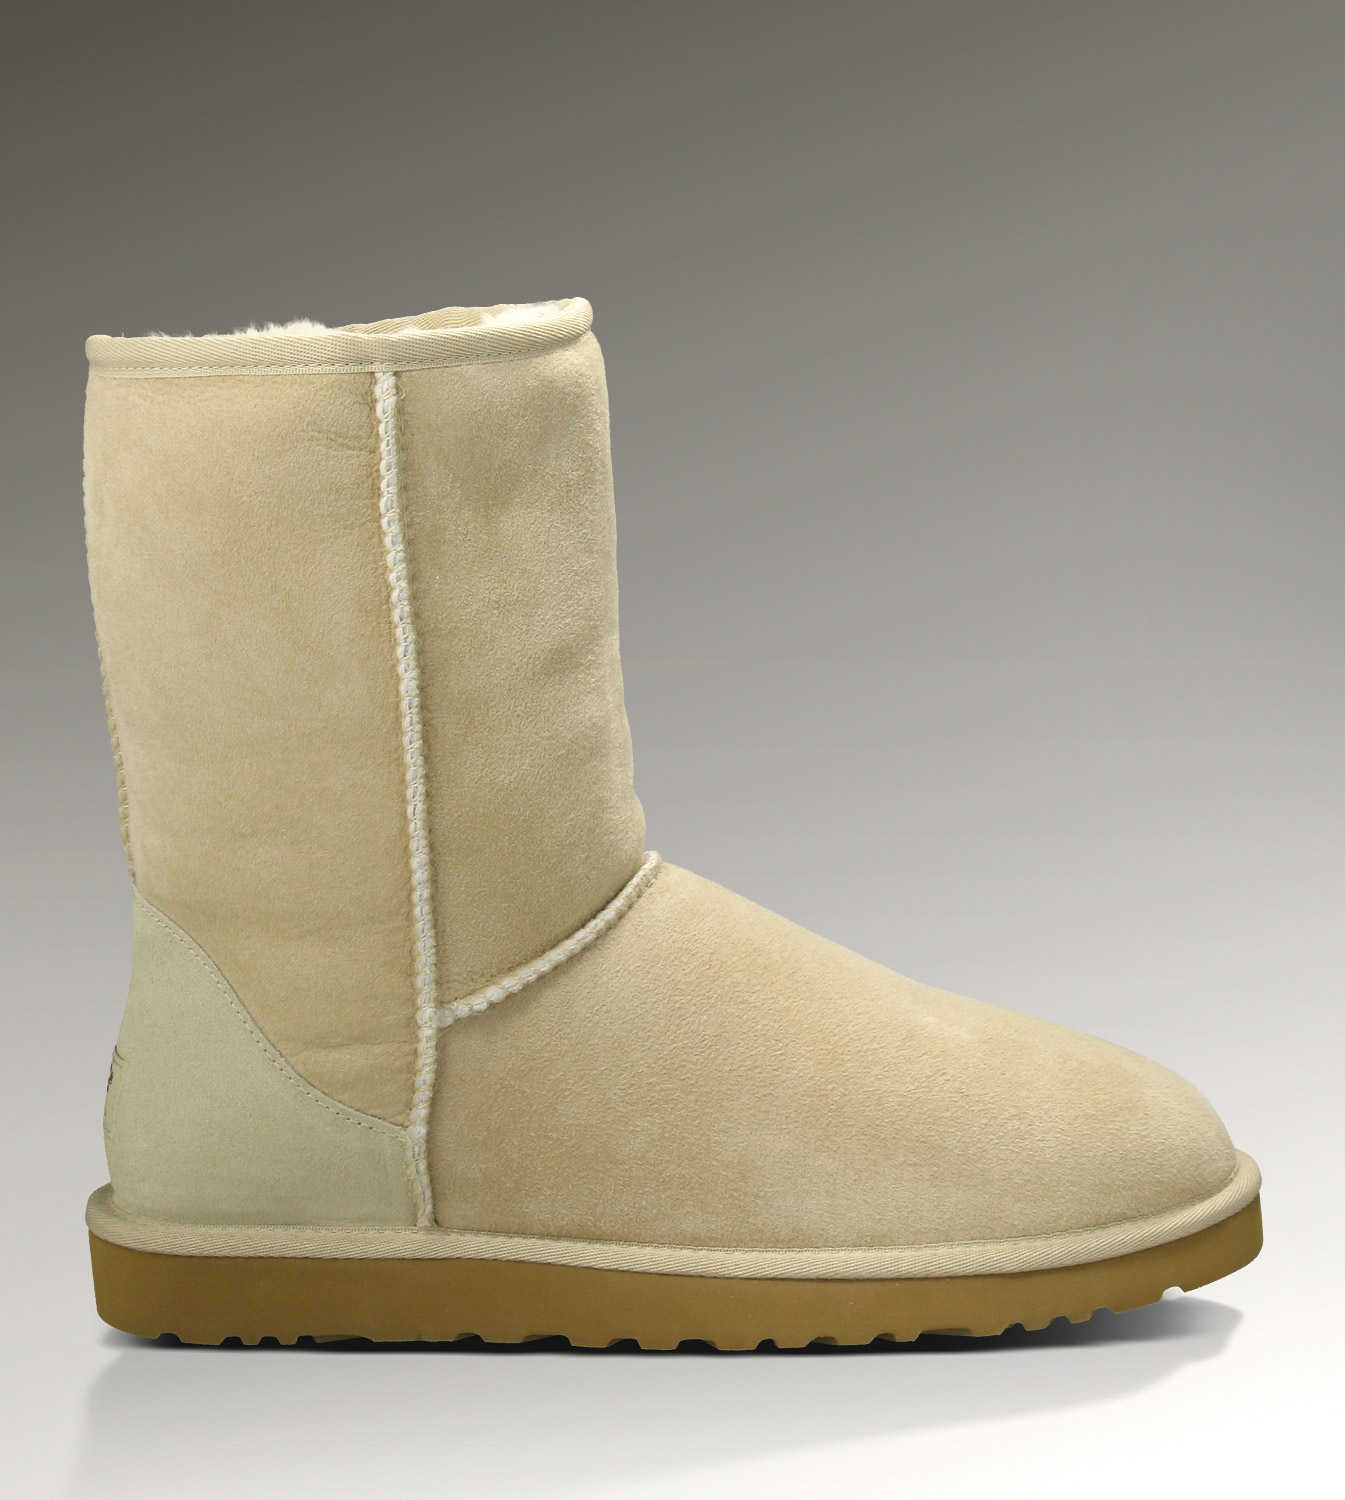 Ugg Outlet Classic Short Sand Boots 682750